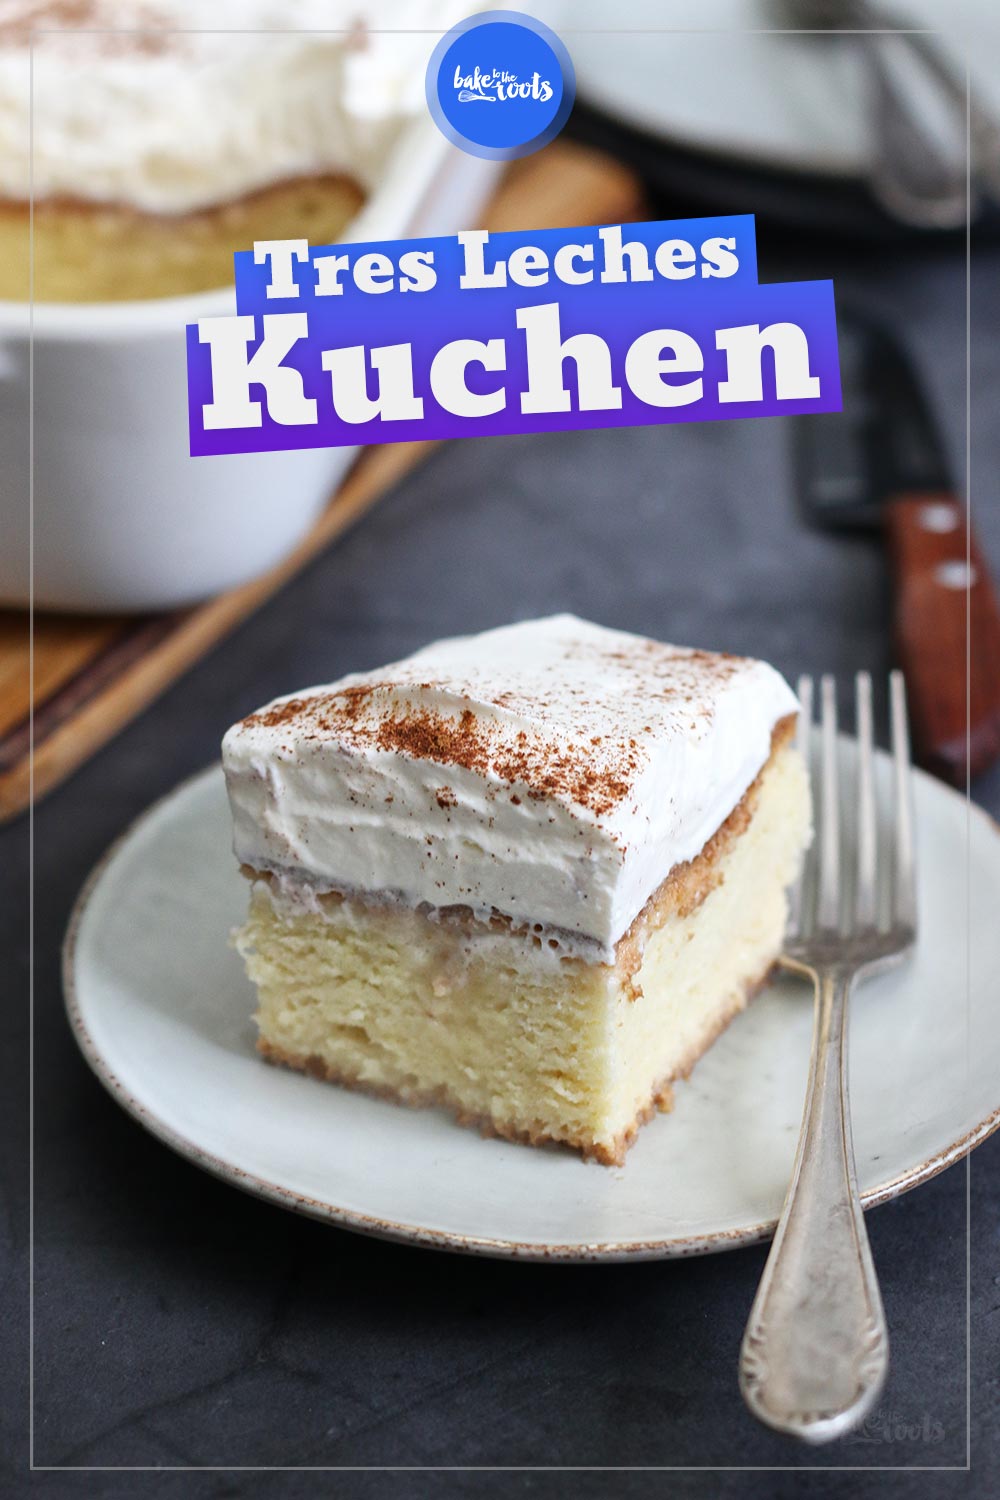 Tres Leches Kuchen | Bake to the roots